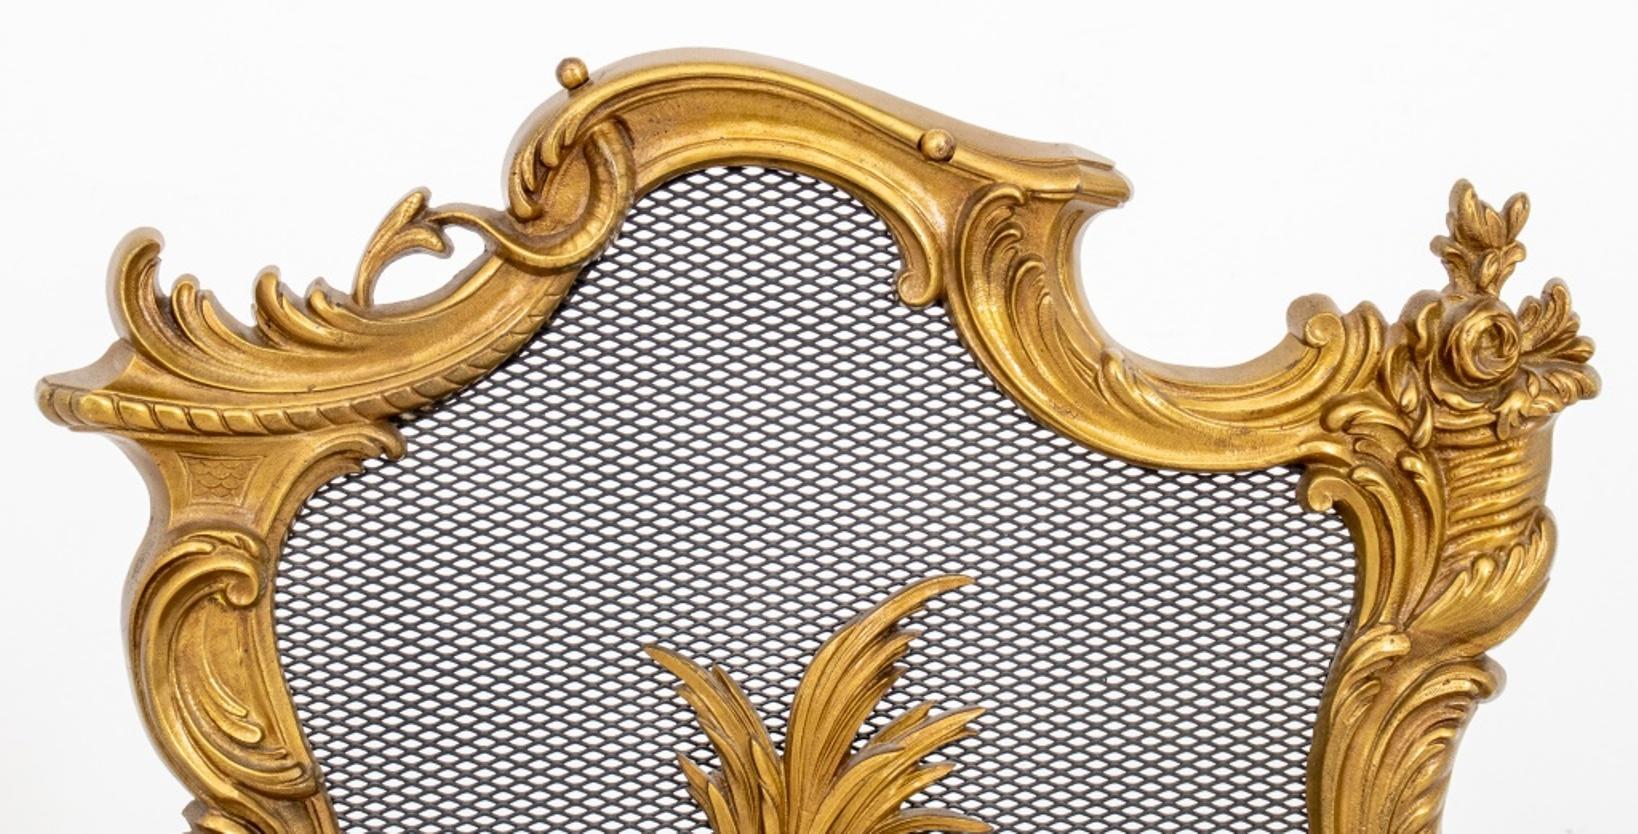 20th Century Rococo Revival Style Gilt Brass Fire Screen For Sale